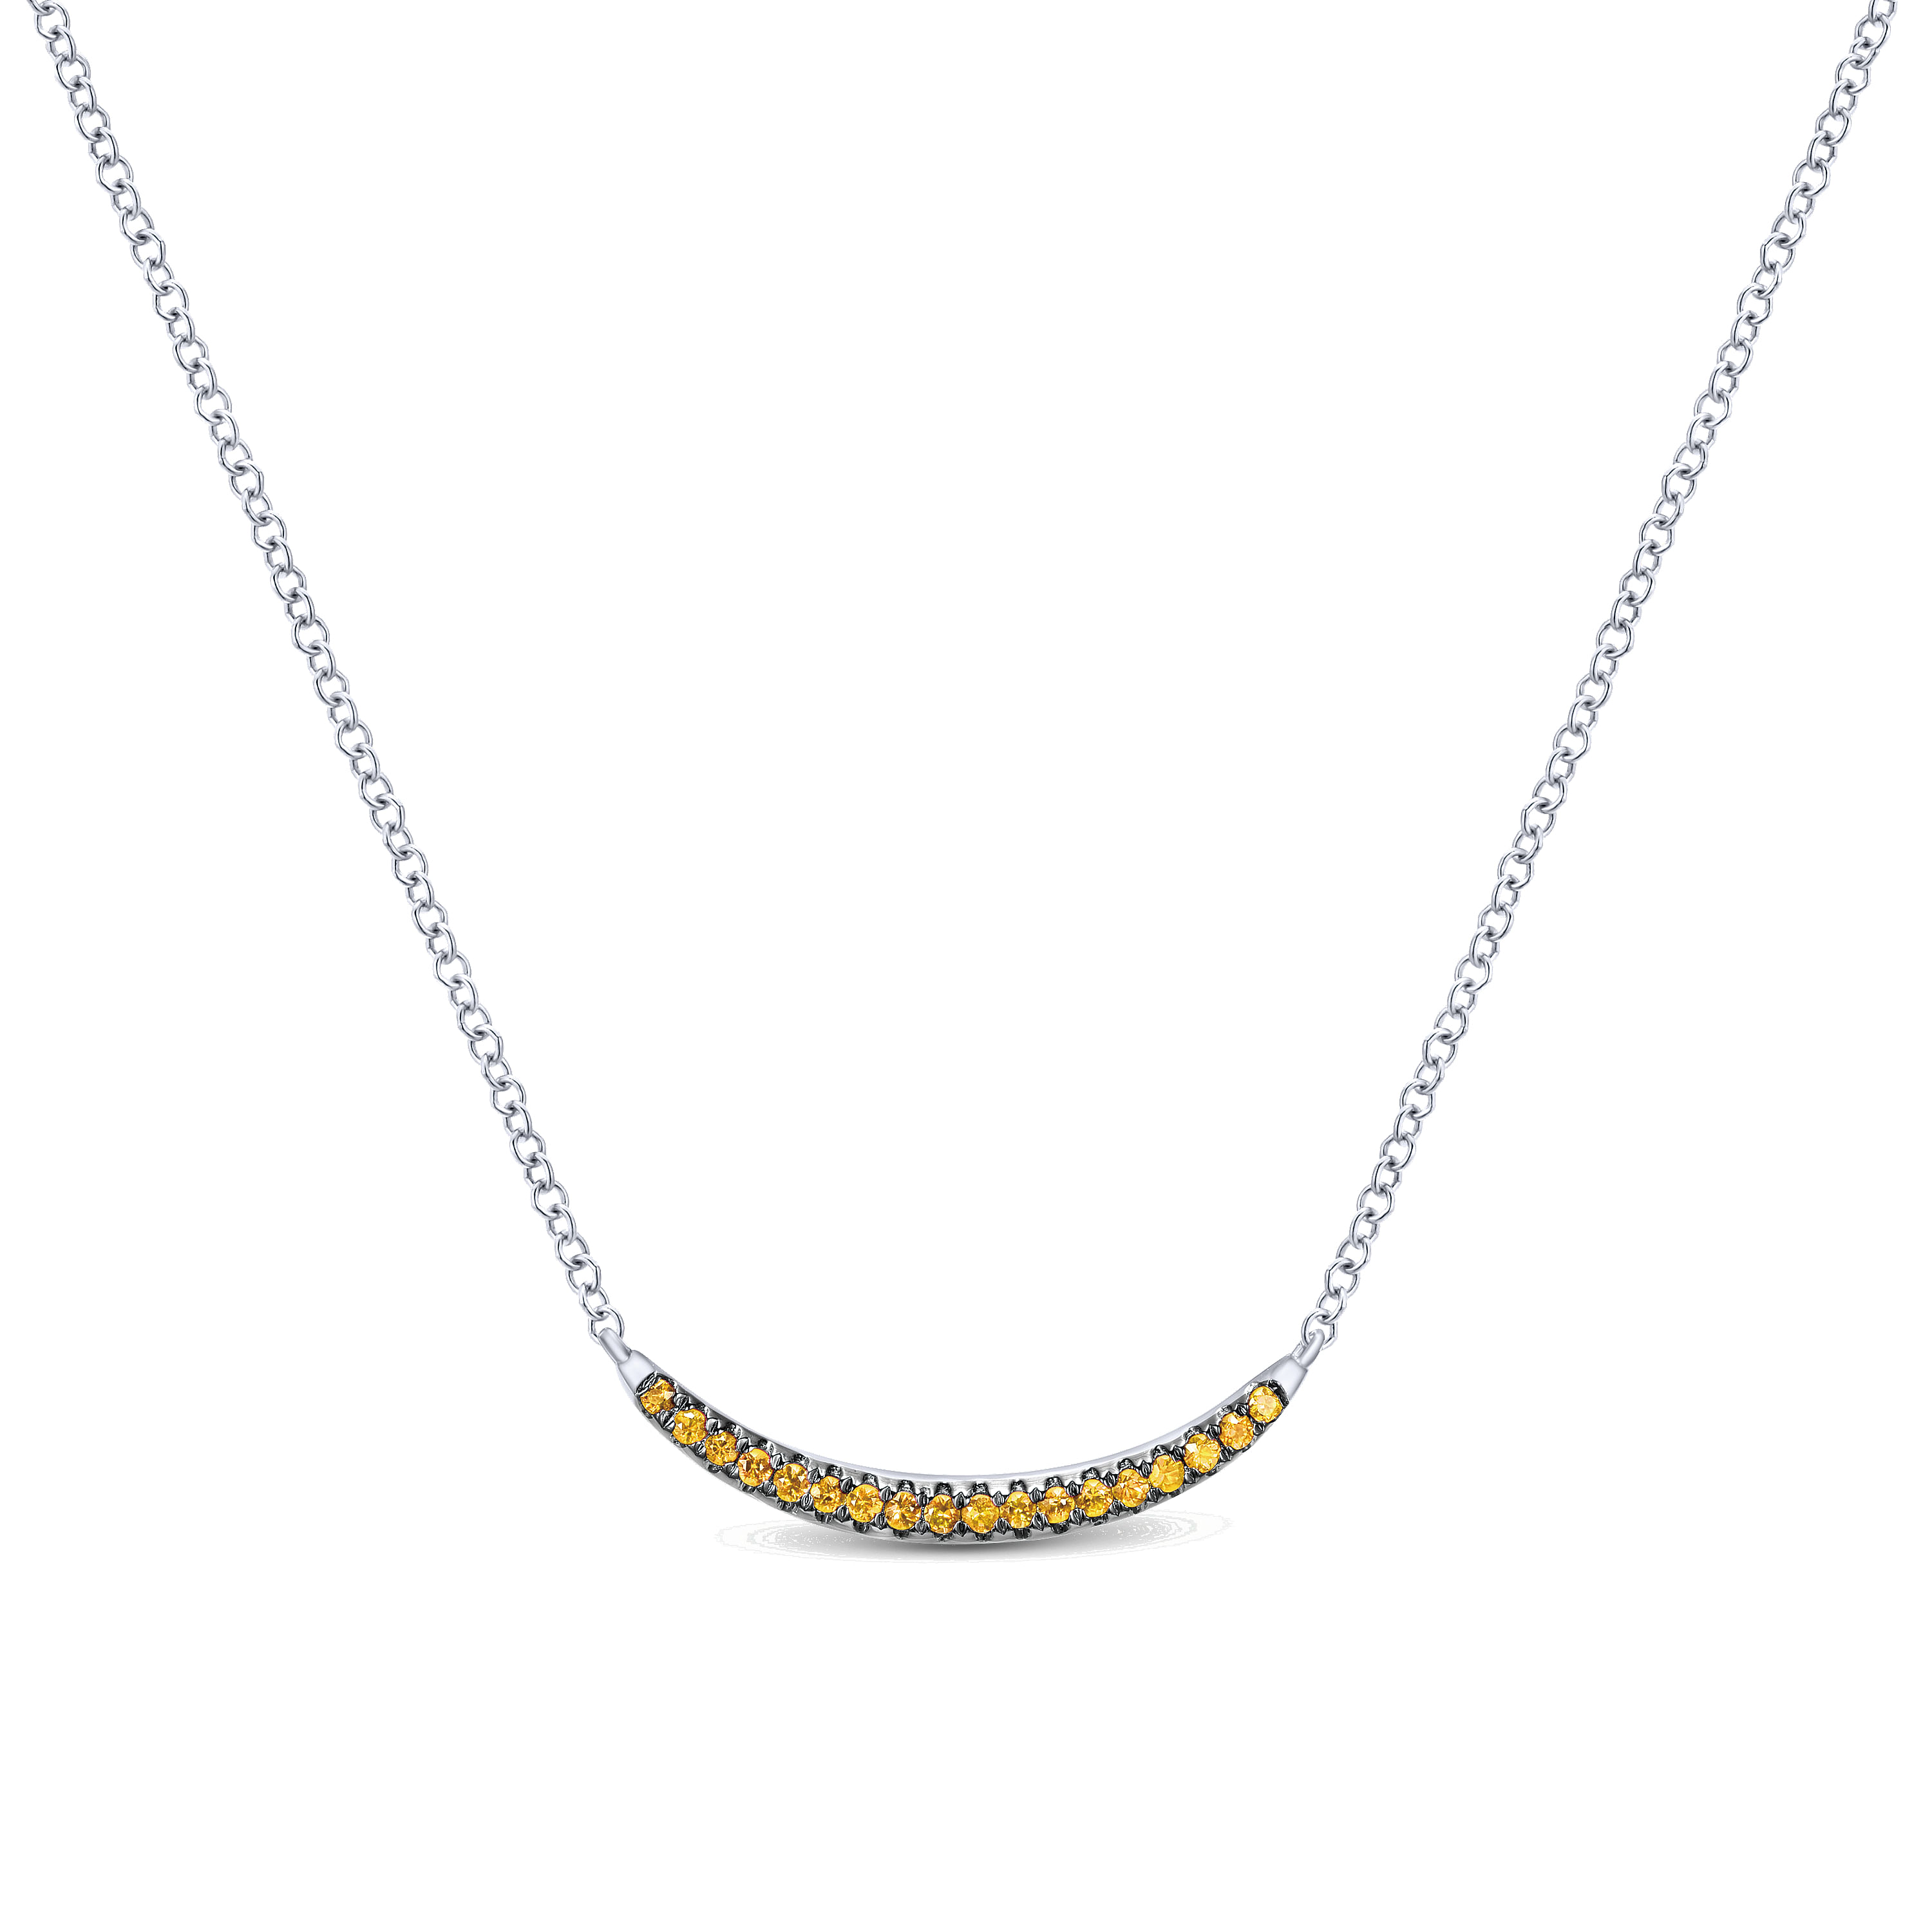 18 inch 925 Sterling Silver and Citrine Curved Bar Necklace